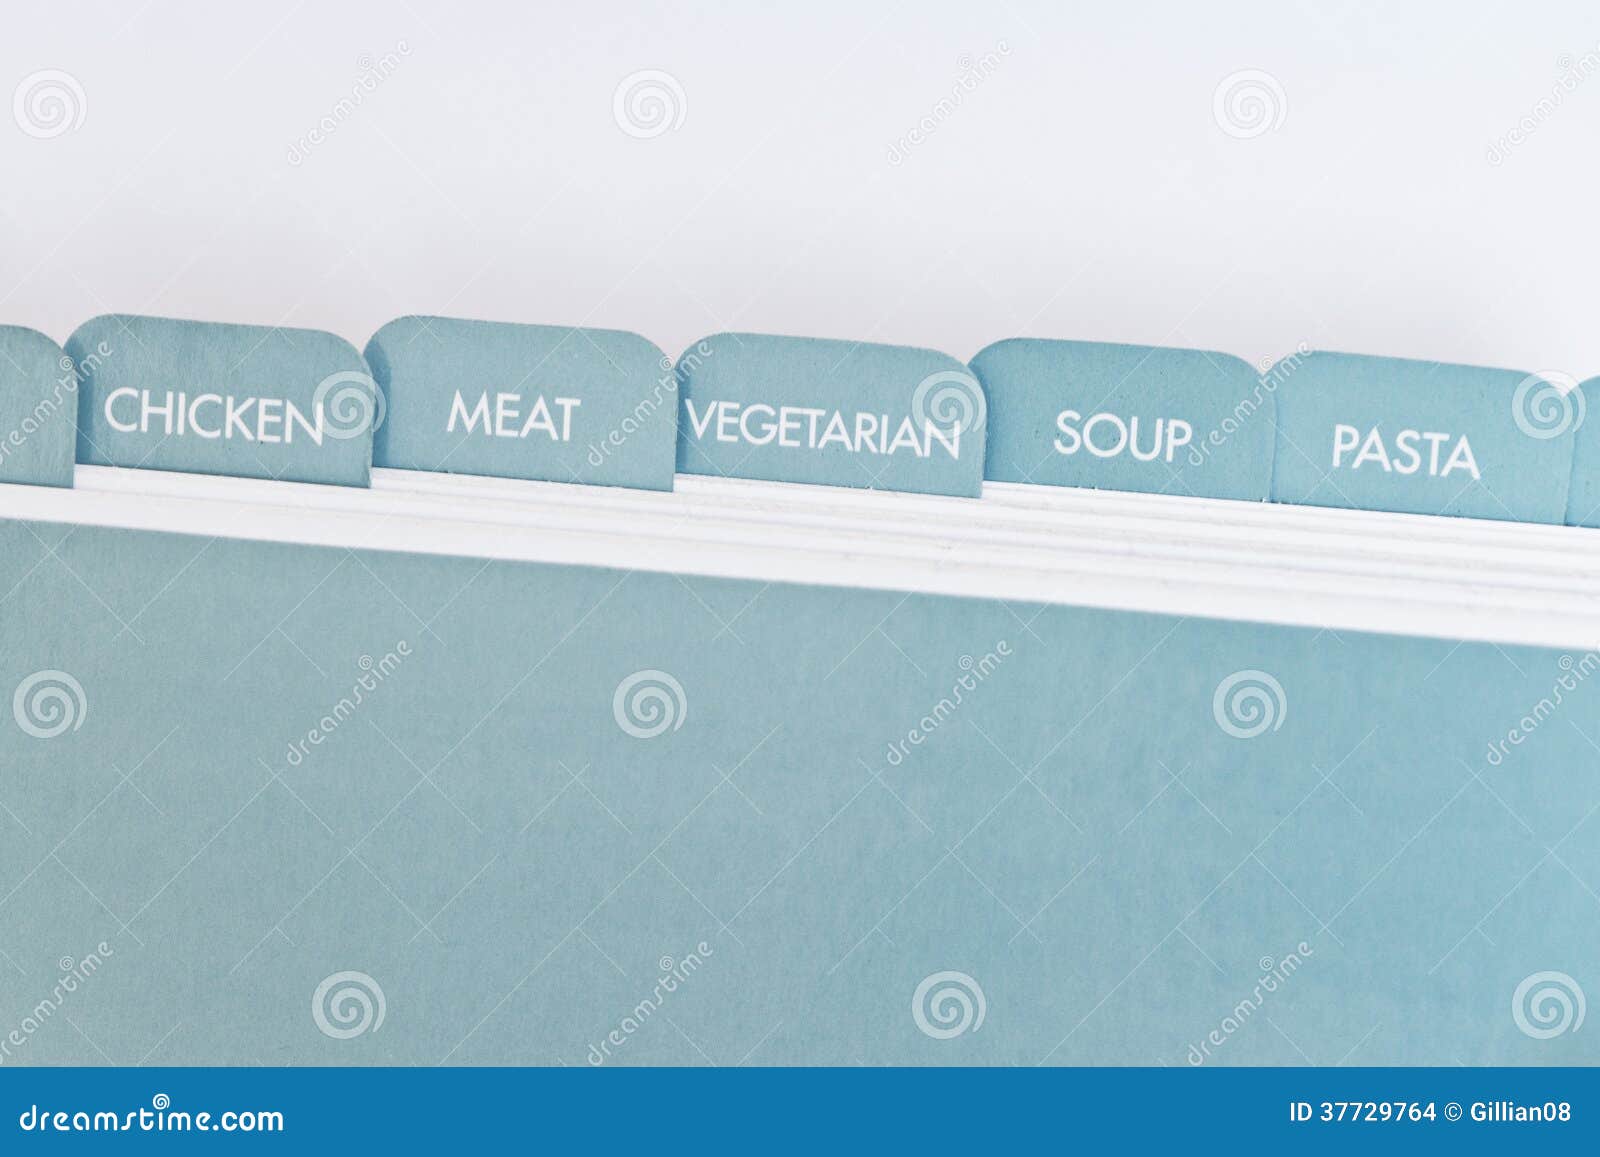 Recipe card dividers stock photo. Image of meat, text - 37729764